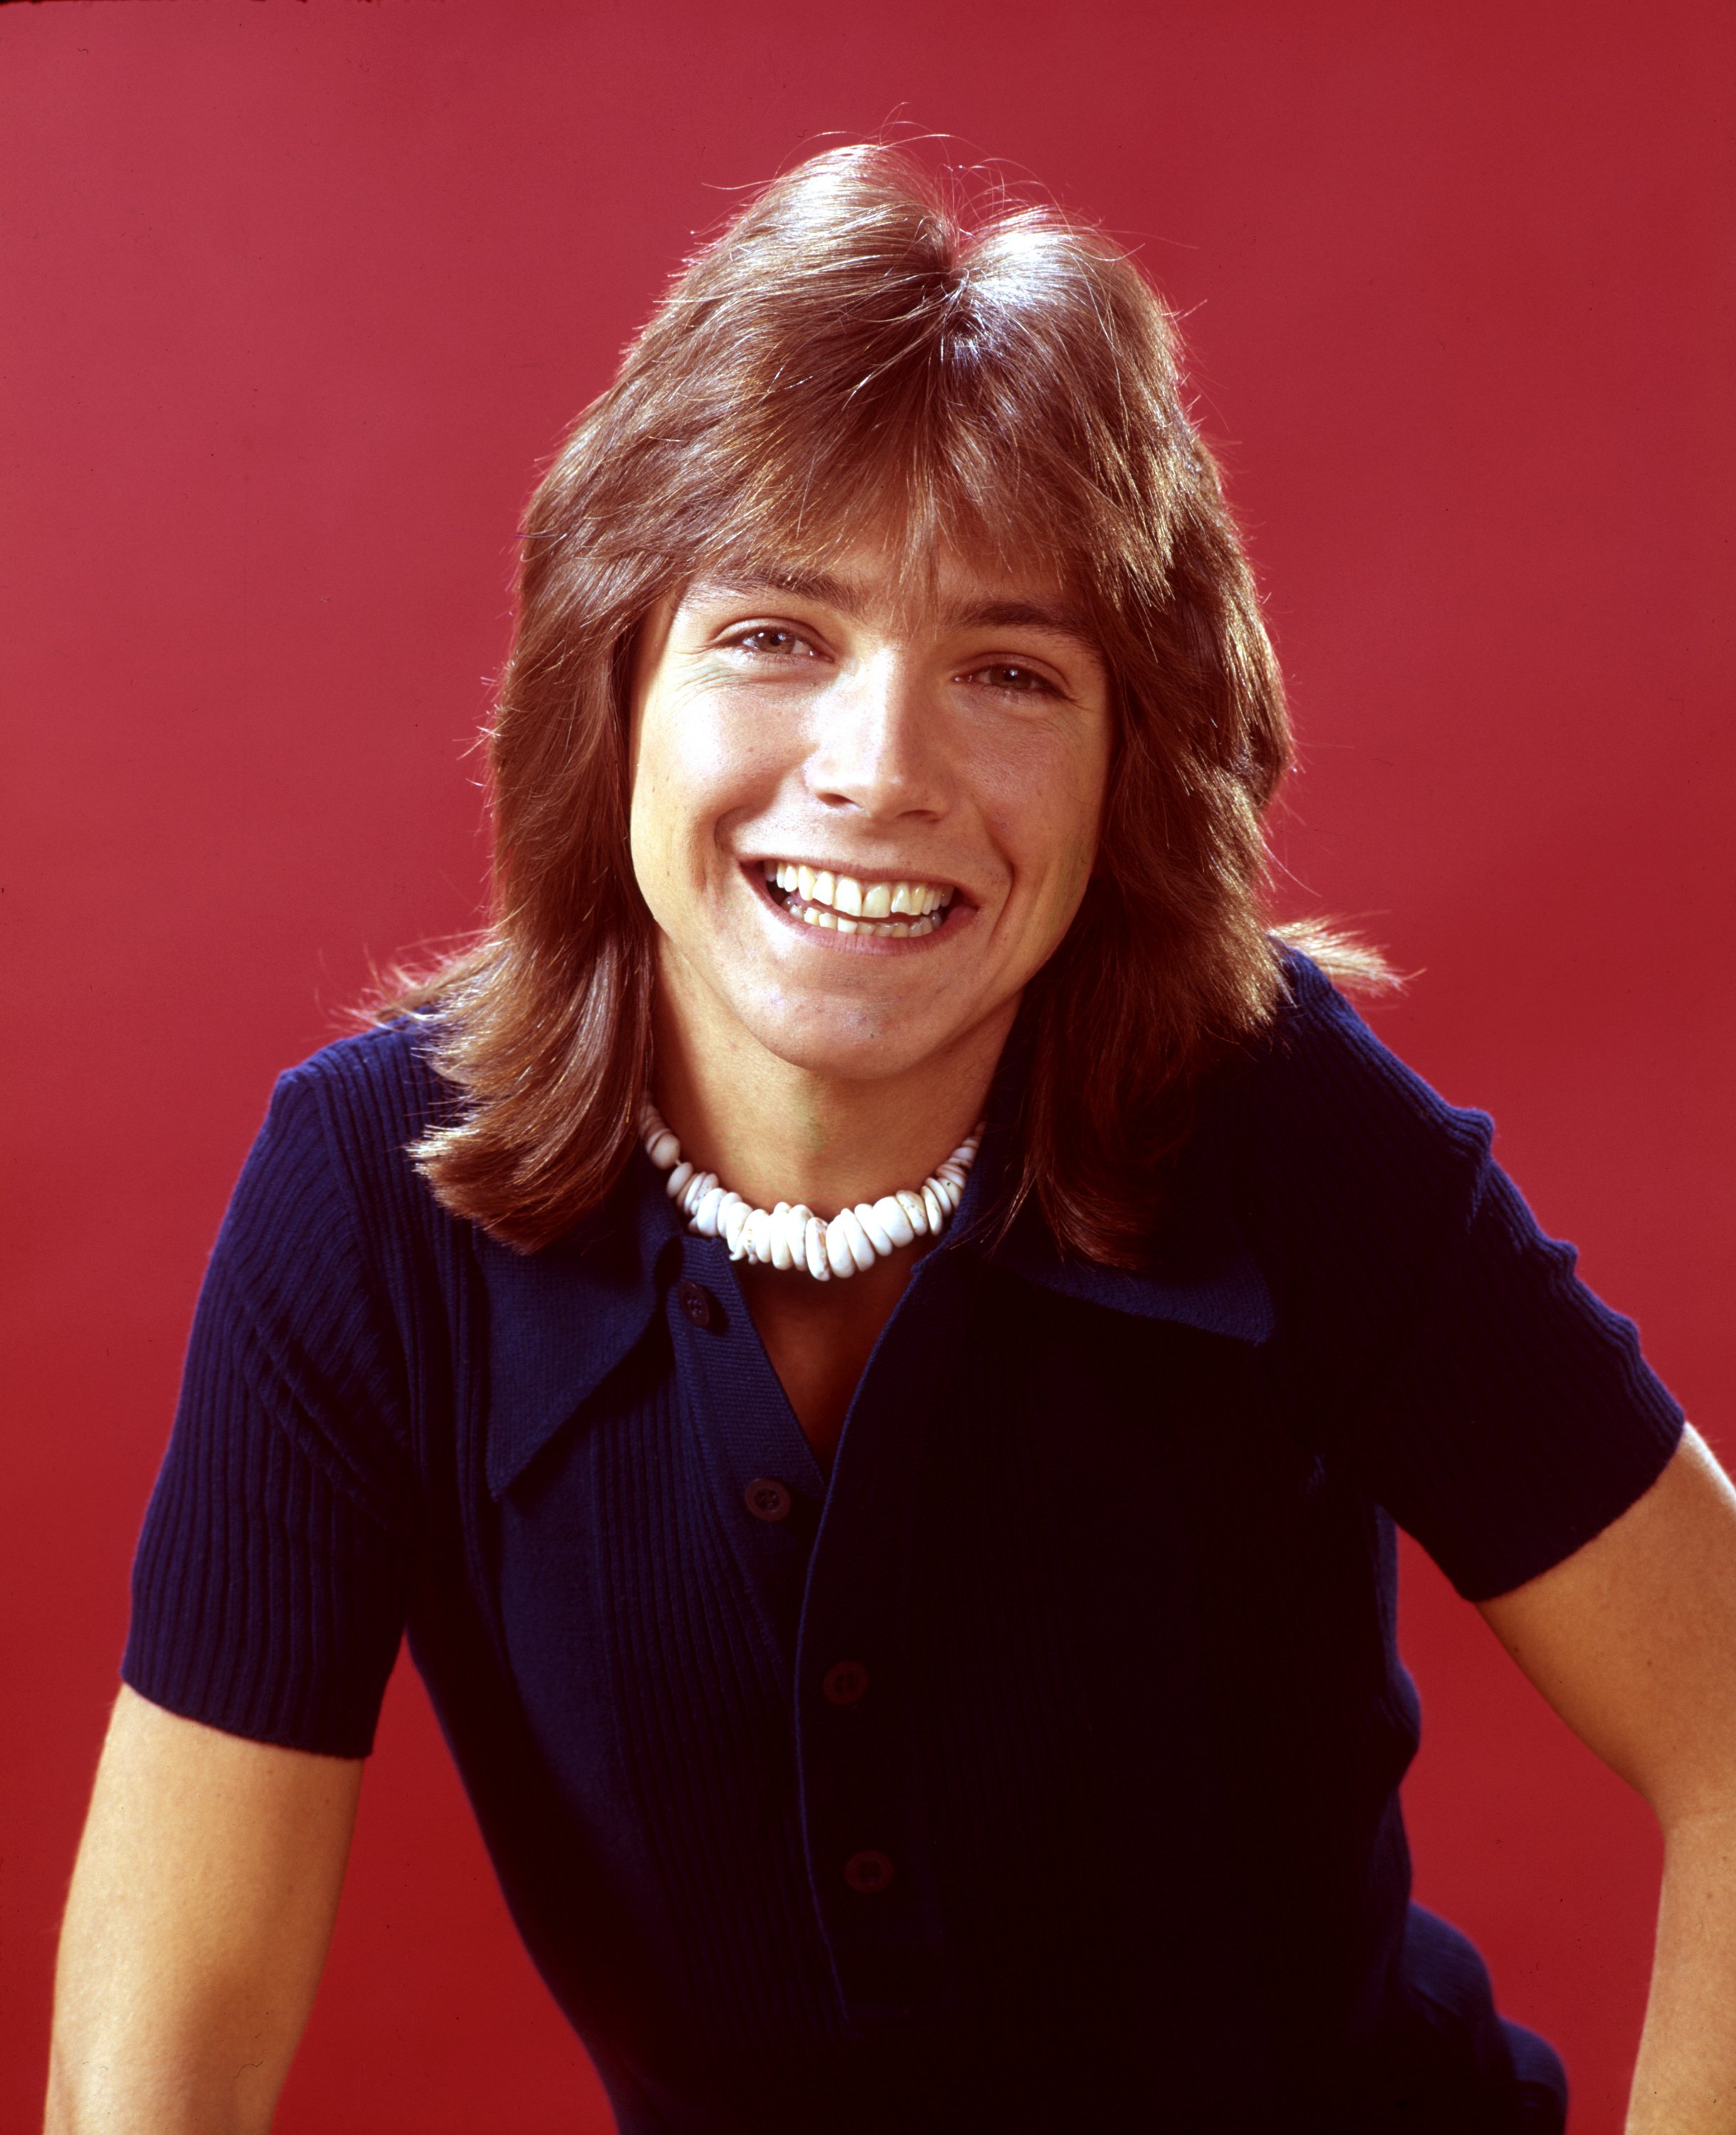 David Cassidy in "THE PARTRIDGE FAMILY," May 22, 1972. | Source: Getty Images